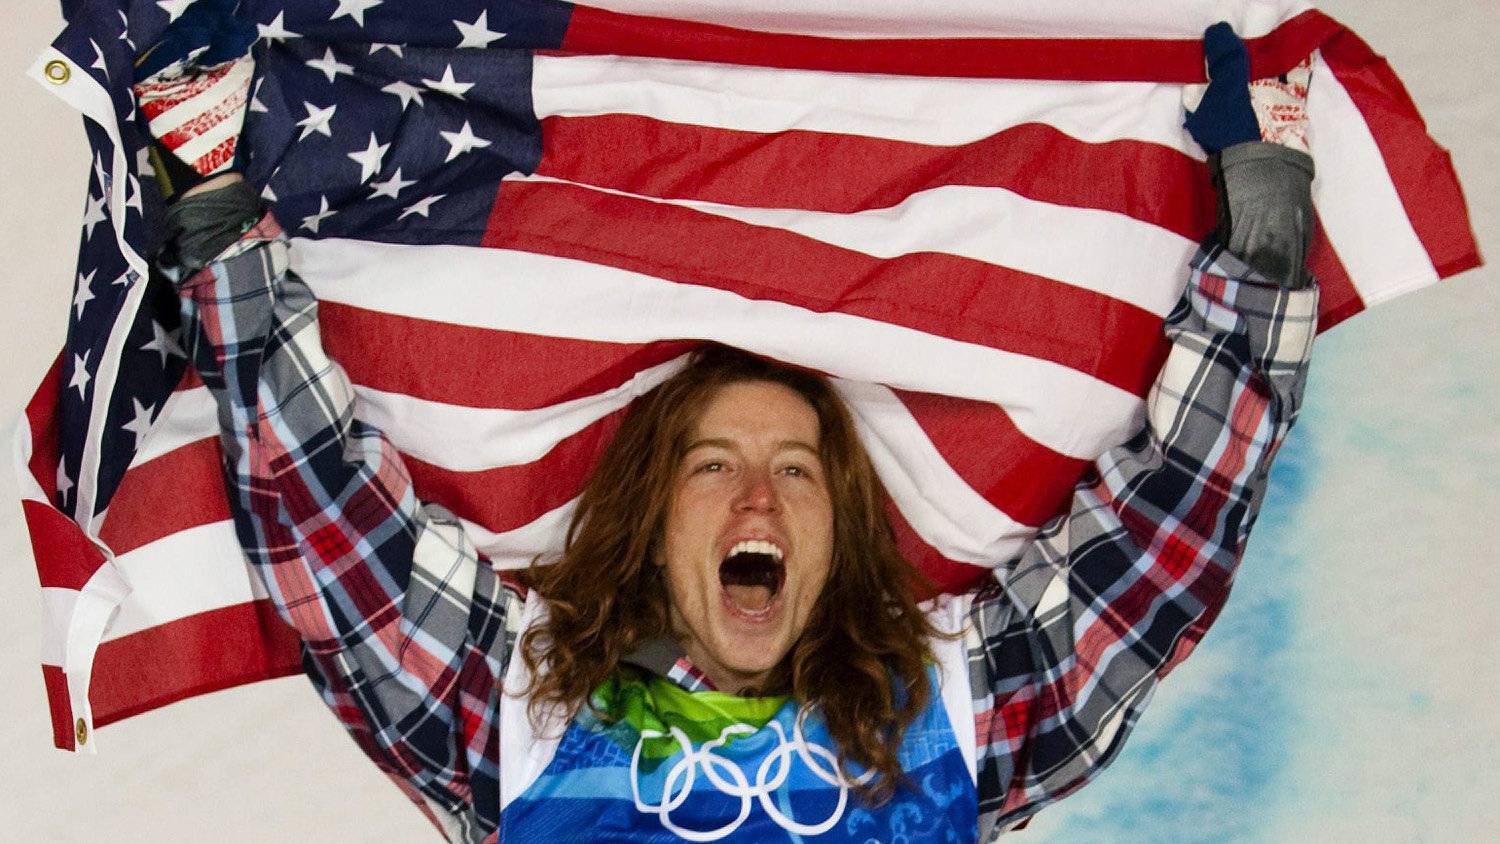 Photos of Shaun White from each of his Olympic Games show just how long  he's dominated the snowboarding world